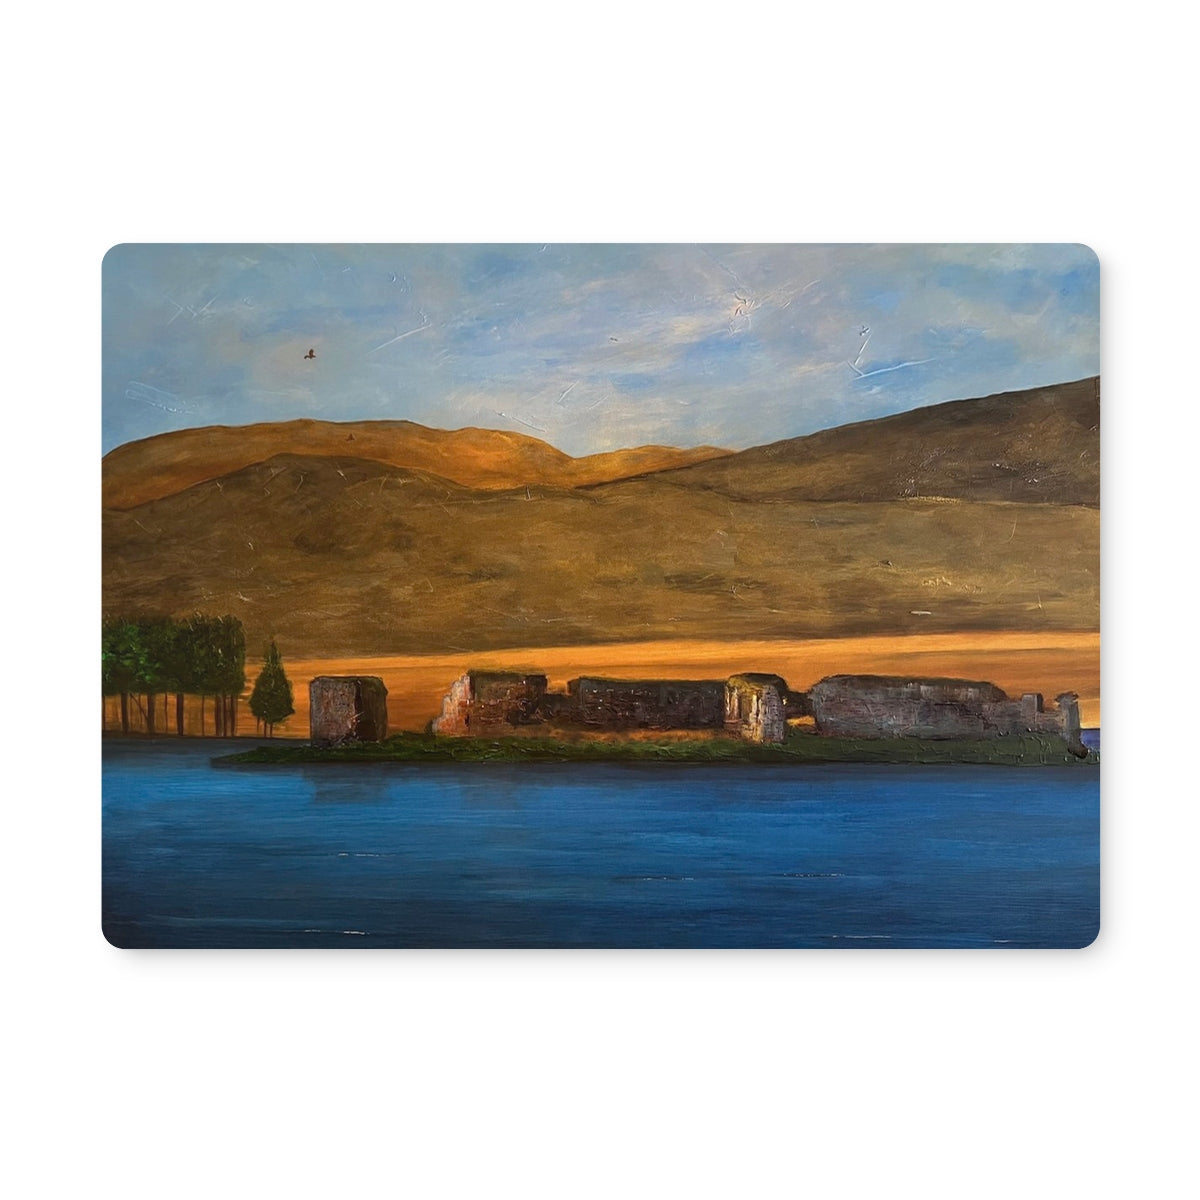 Lochindorb Castle Art Gifts Placemat-Placemats-Scottish Lochs & Mountains Art Gallery-6 Placemats-Paintings, Prints, Homeware, Art Gifts From Scotland By Scottish Artist Kevin Hunter